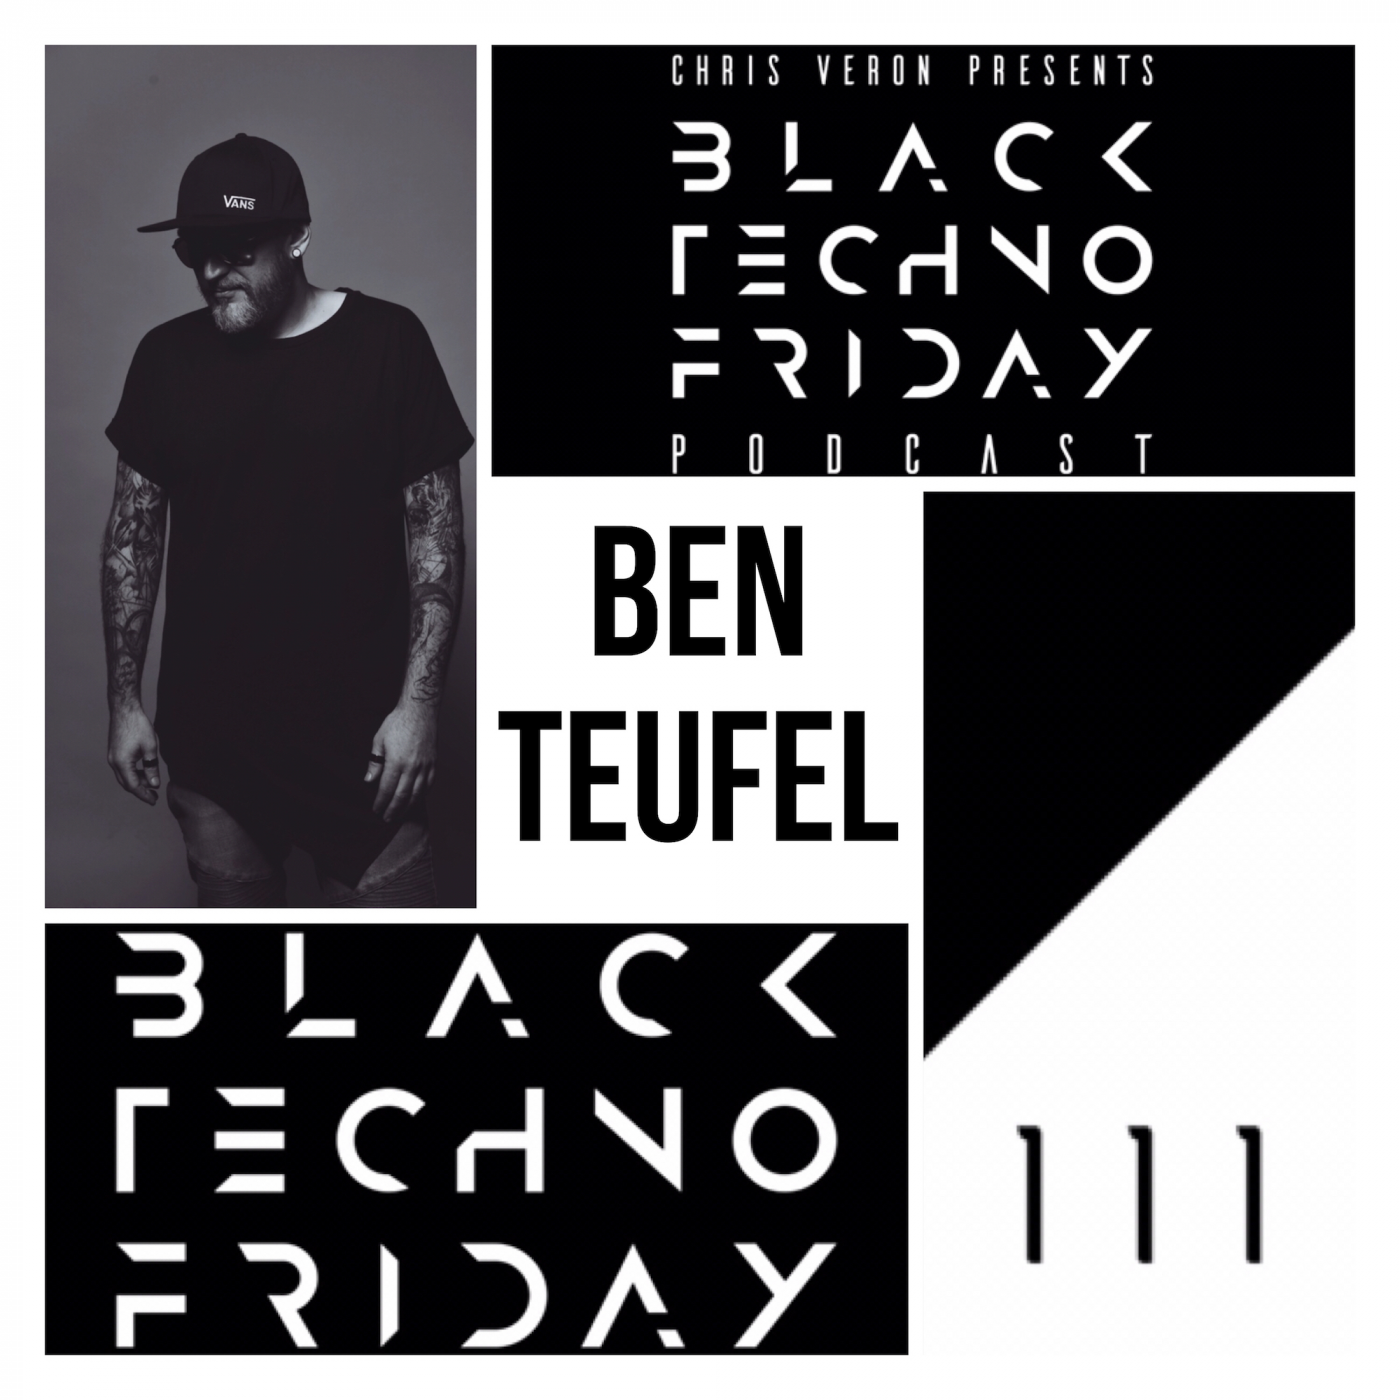 Black TECHNO Friday Podcast #111 | Ben Teufel (Prospect/Say What/Gain)